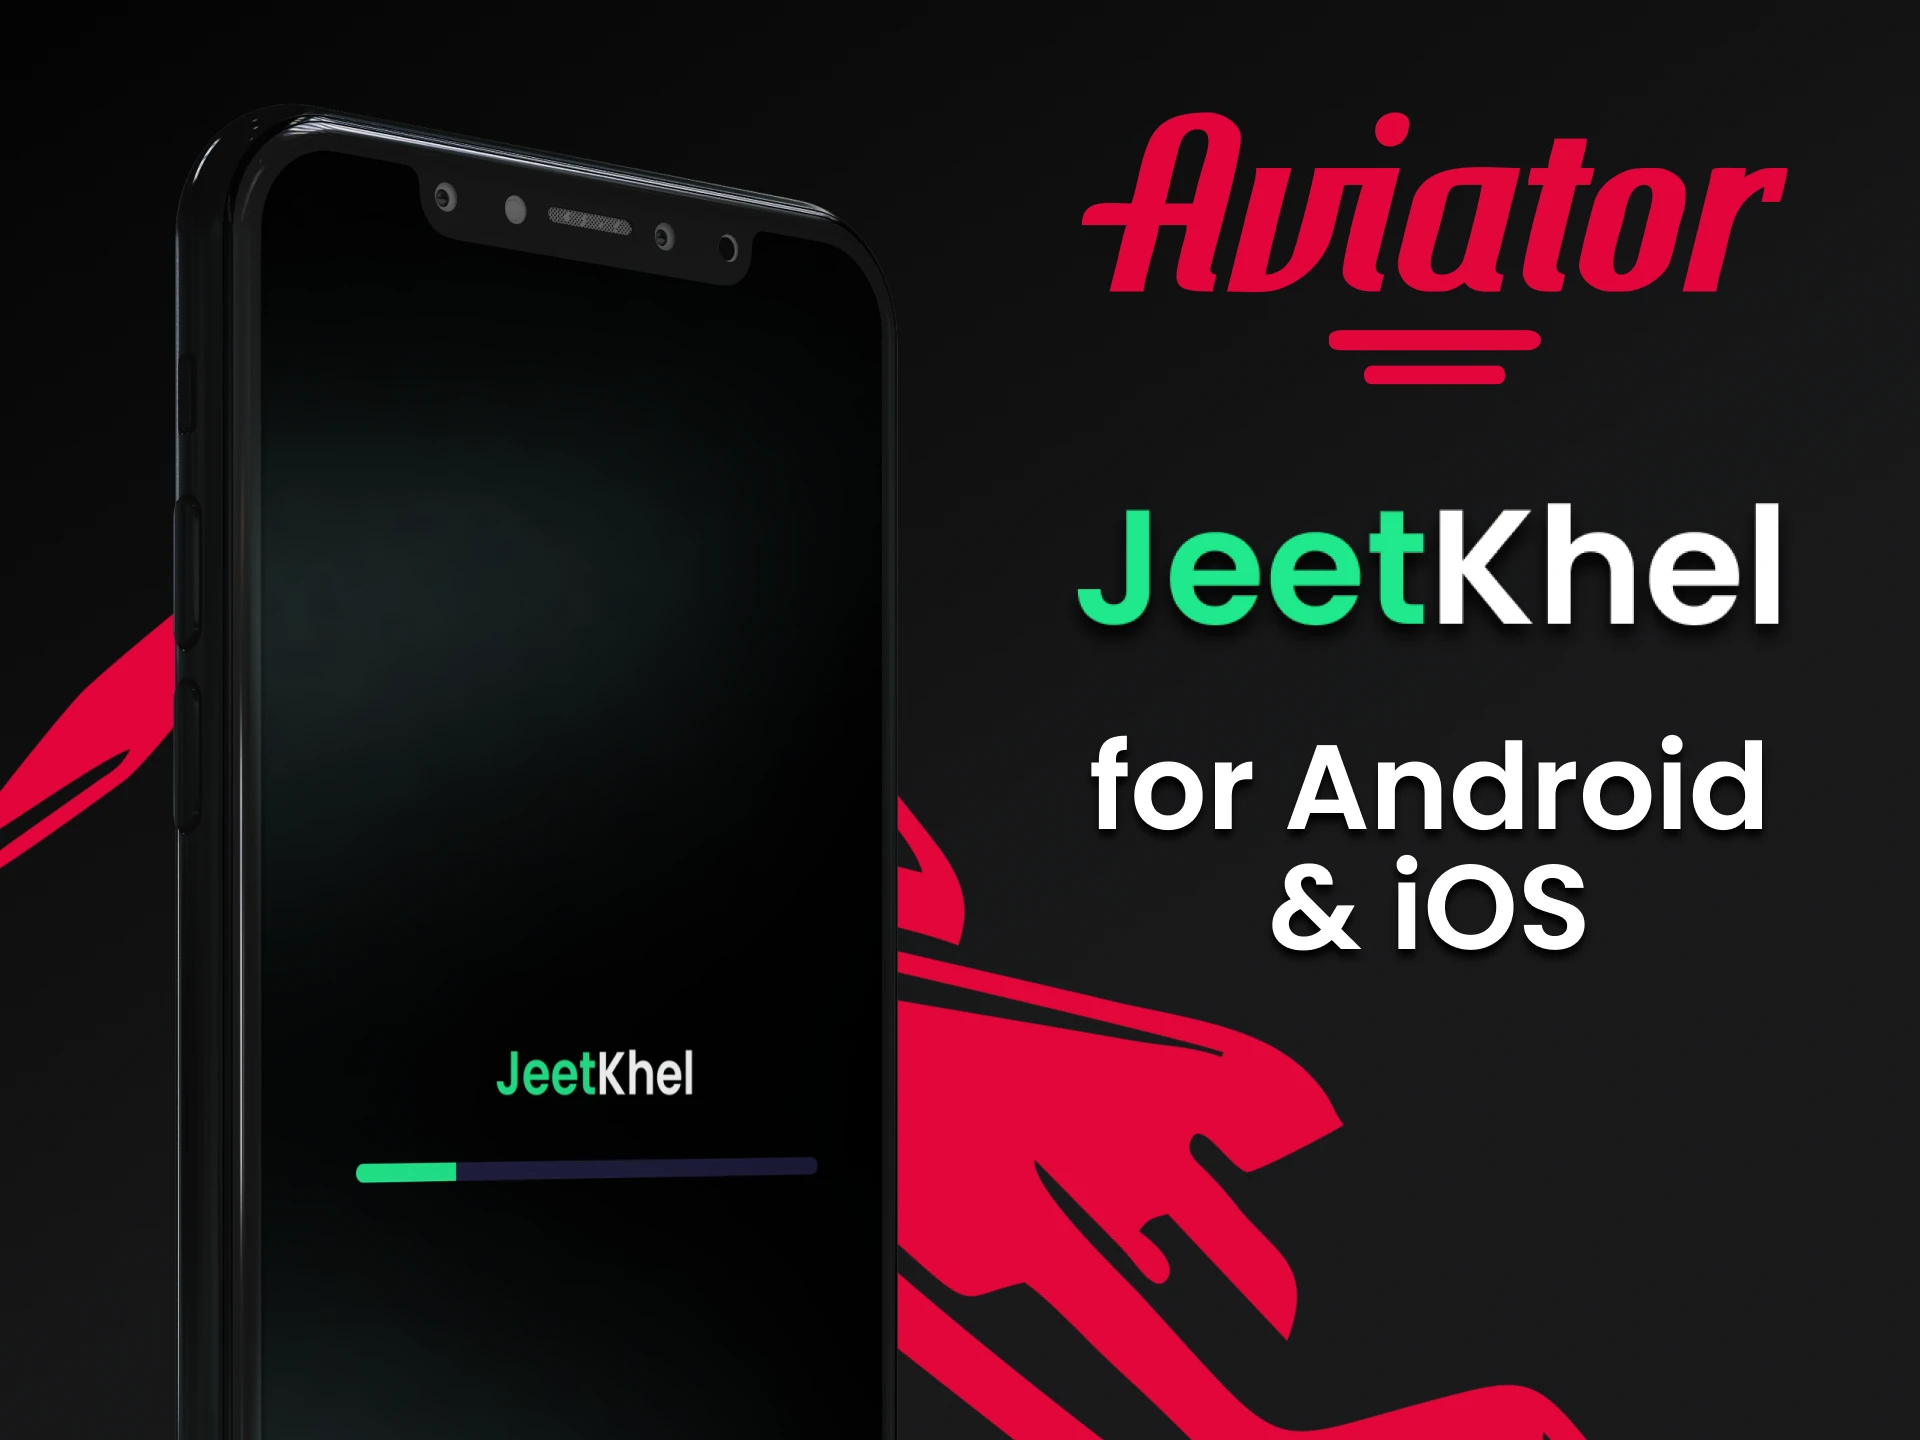 Use your smartphone and download the JeetKhel app to play Aviator.